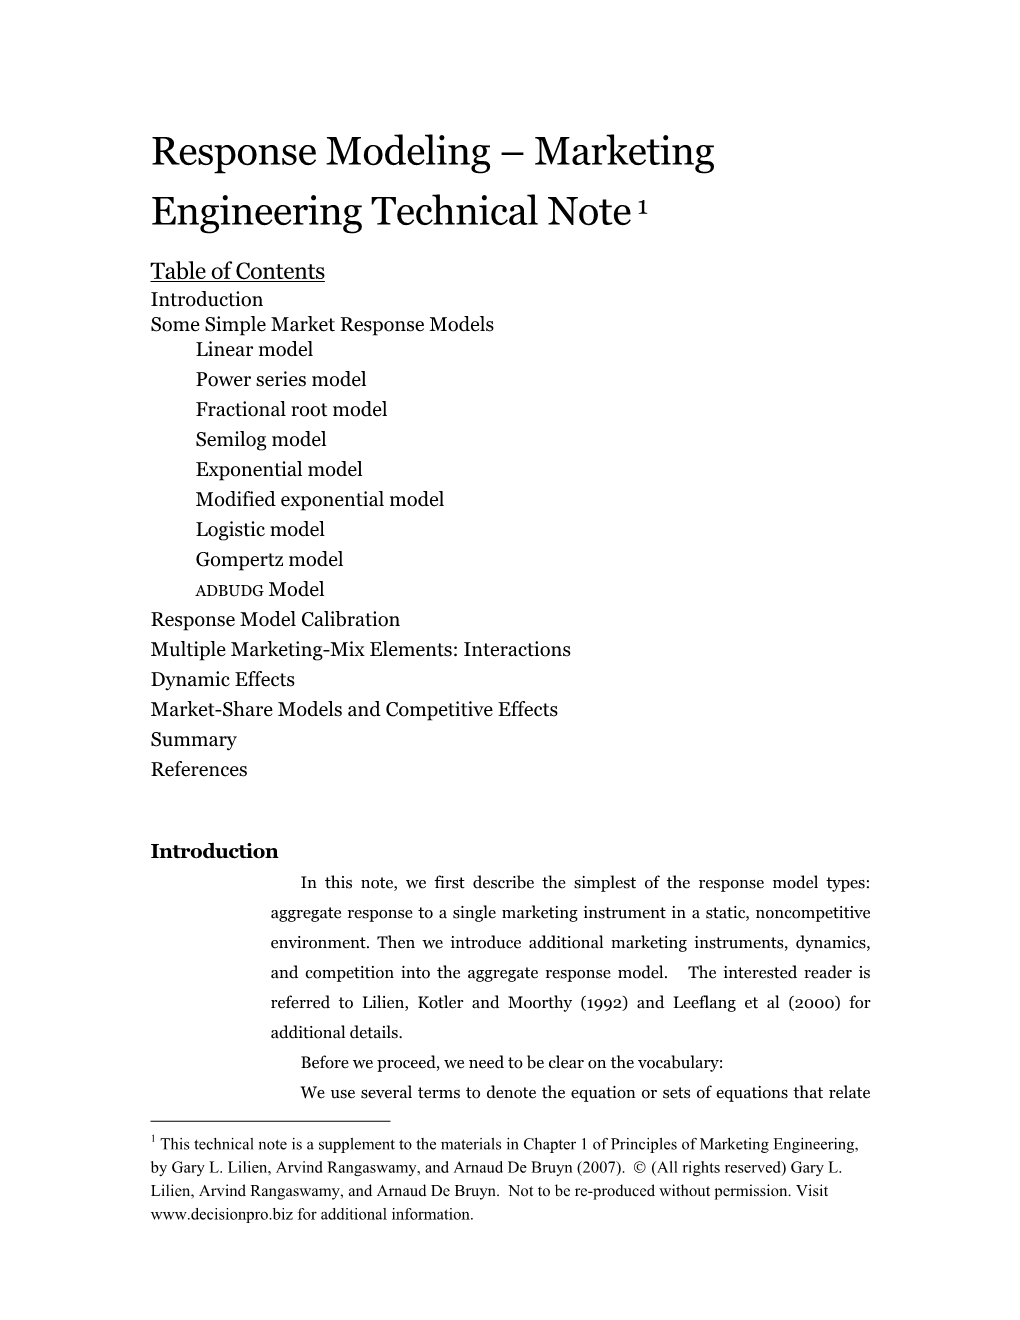 Response Modeling – Marketing Engineering Technical Note1